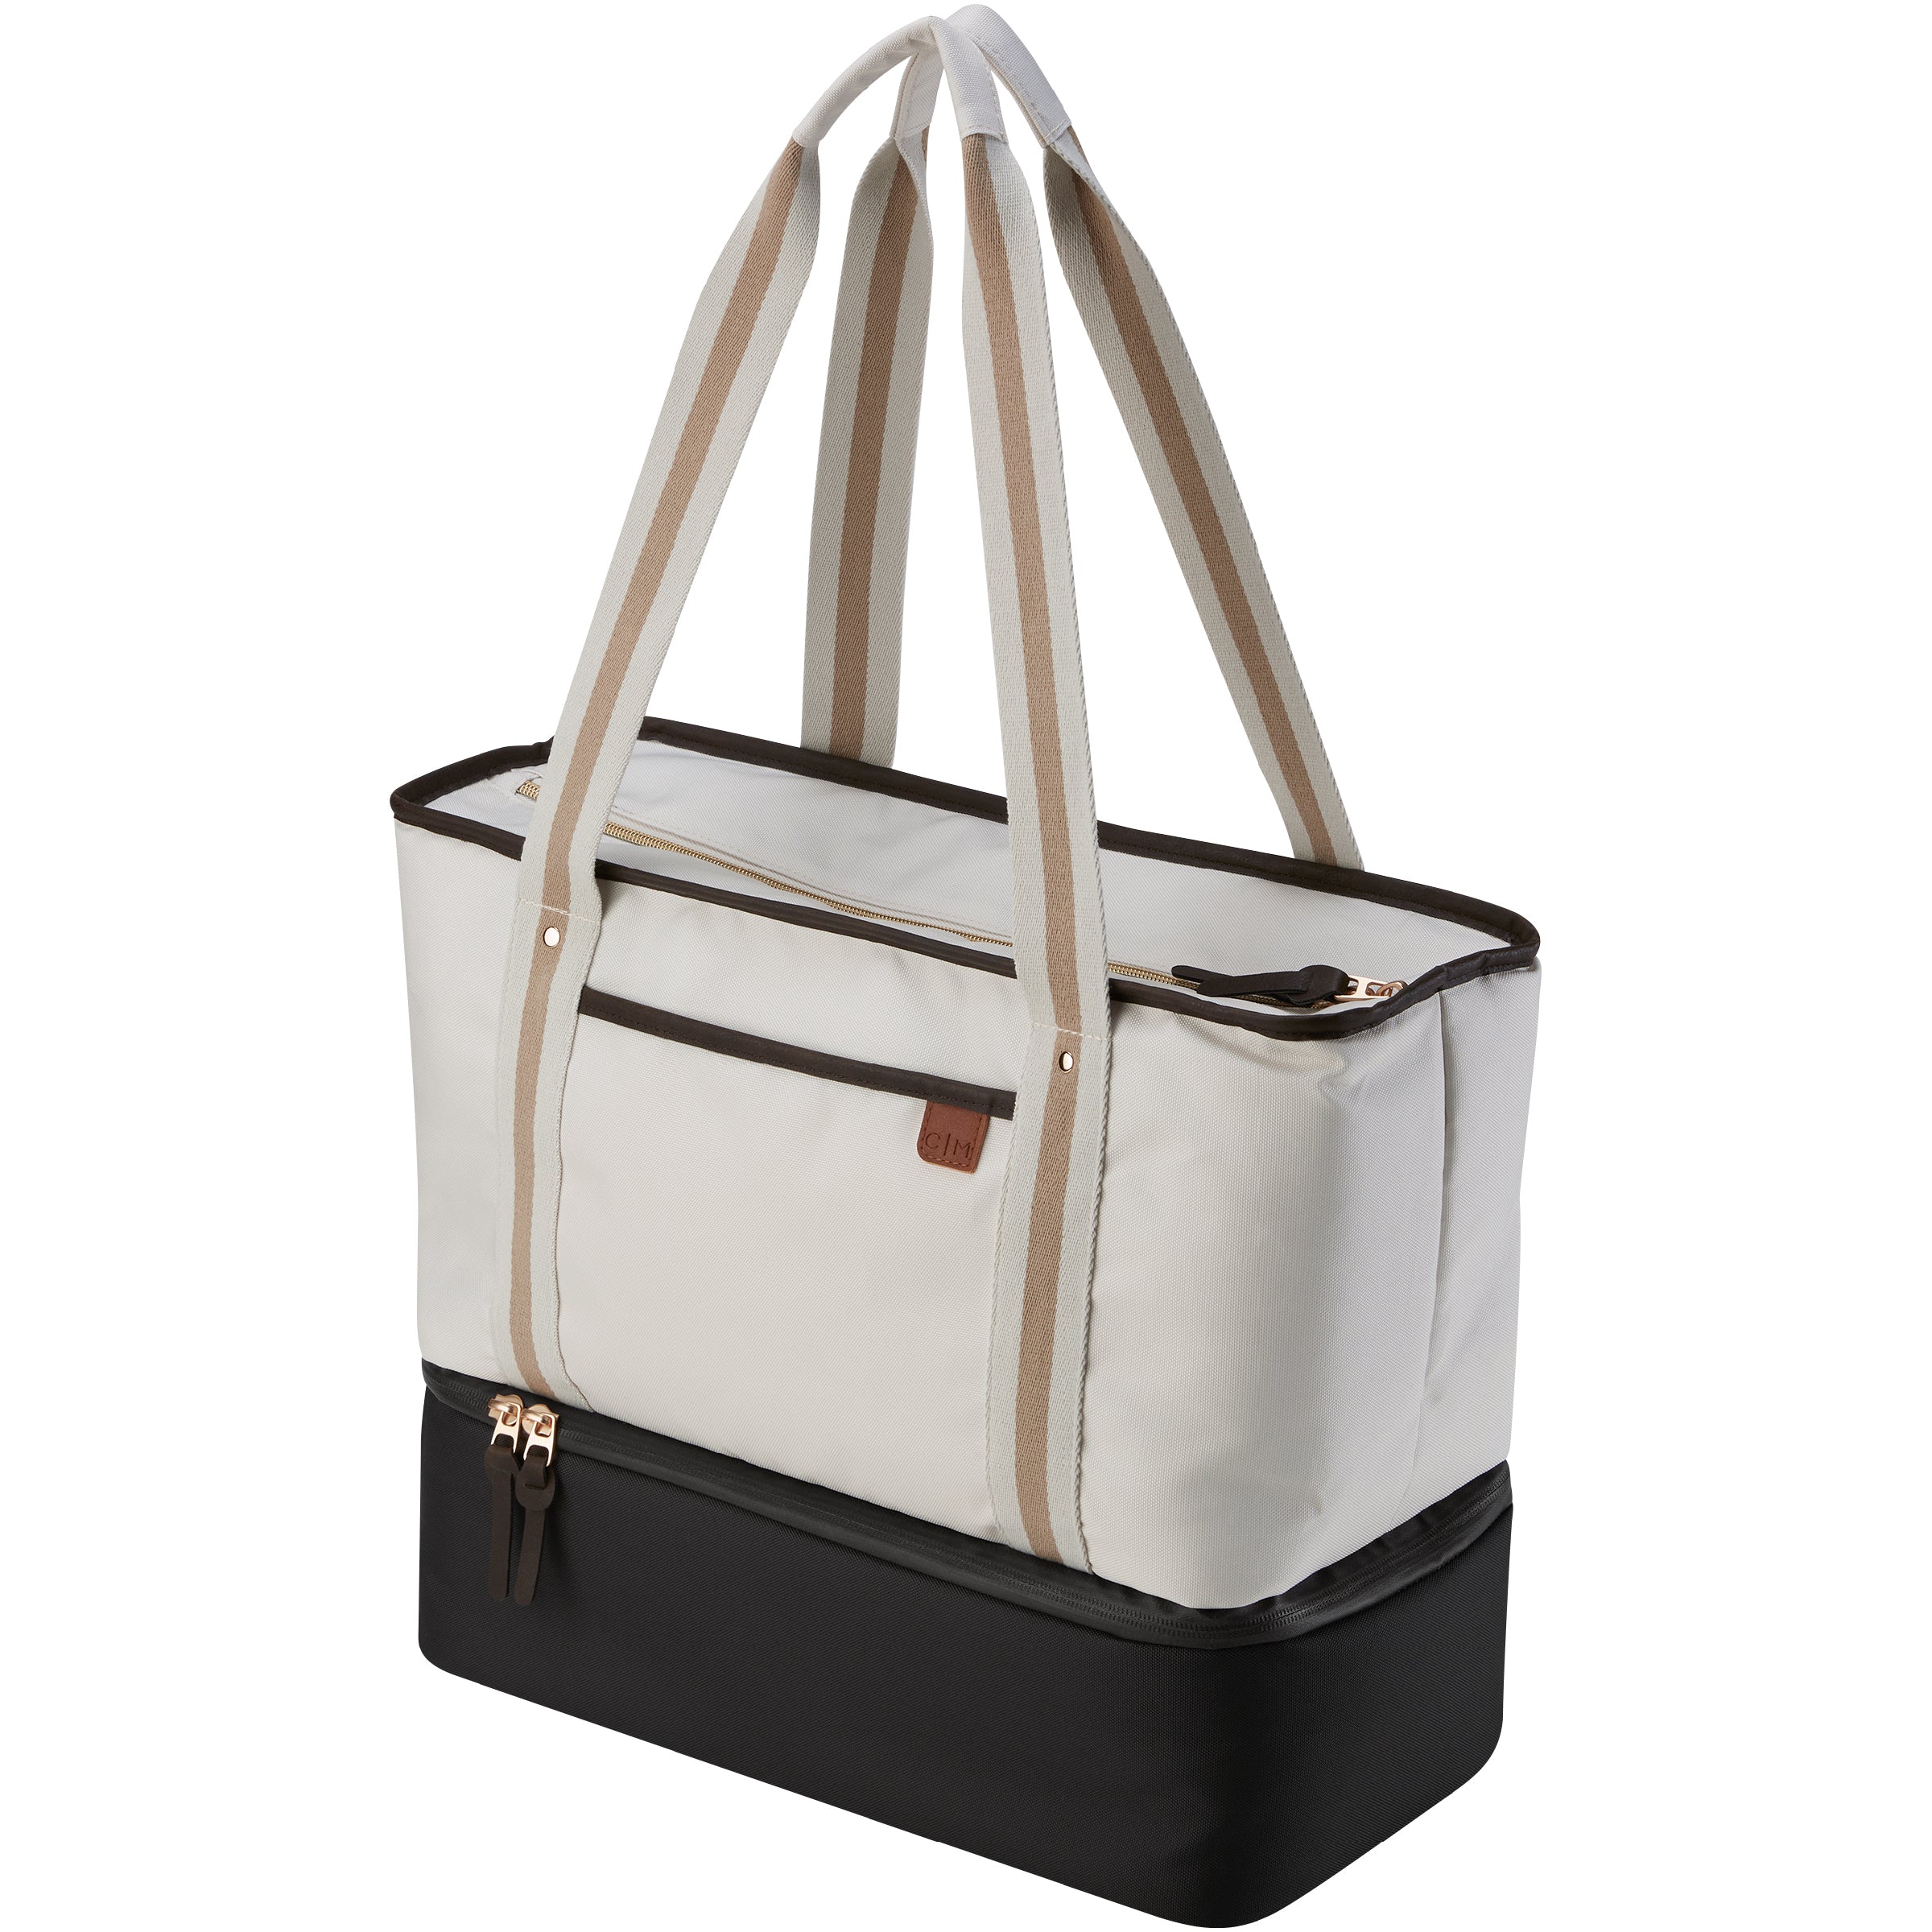 Caraket Canvas Tote Bag with Shoulder Strap White One Size